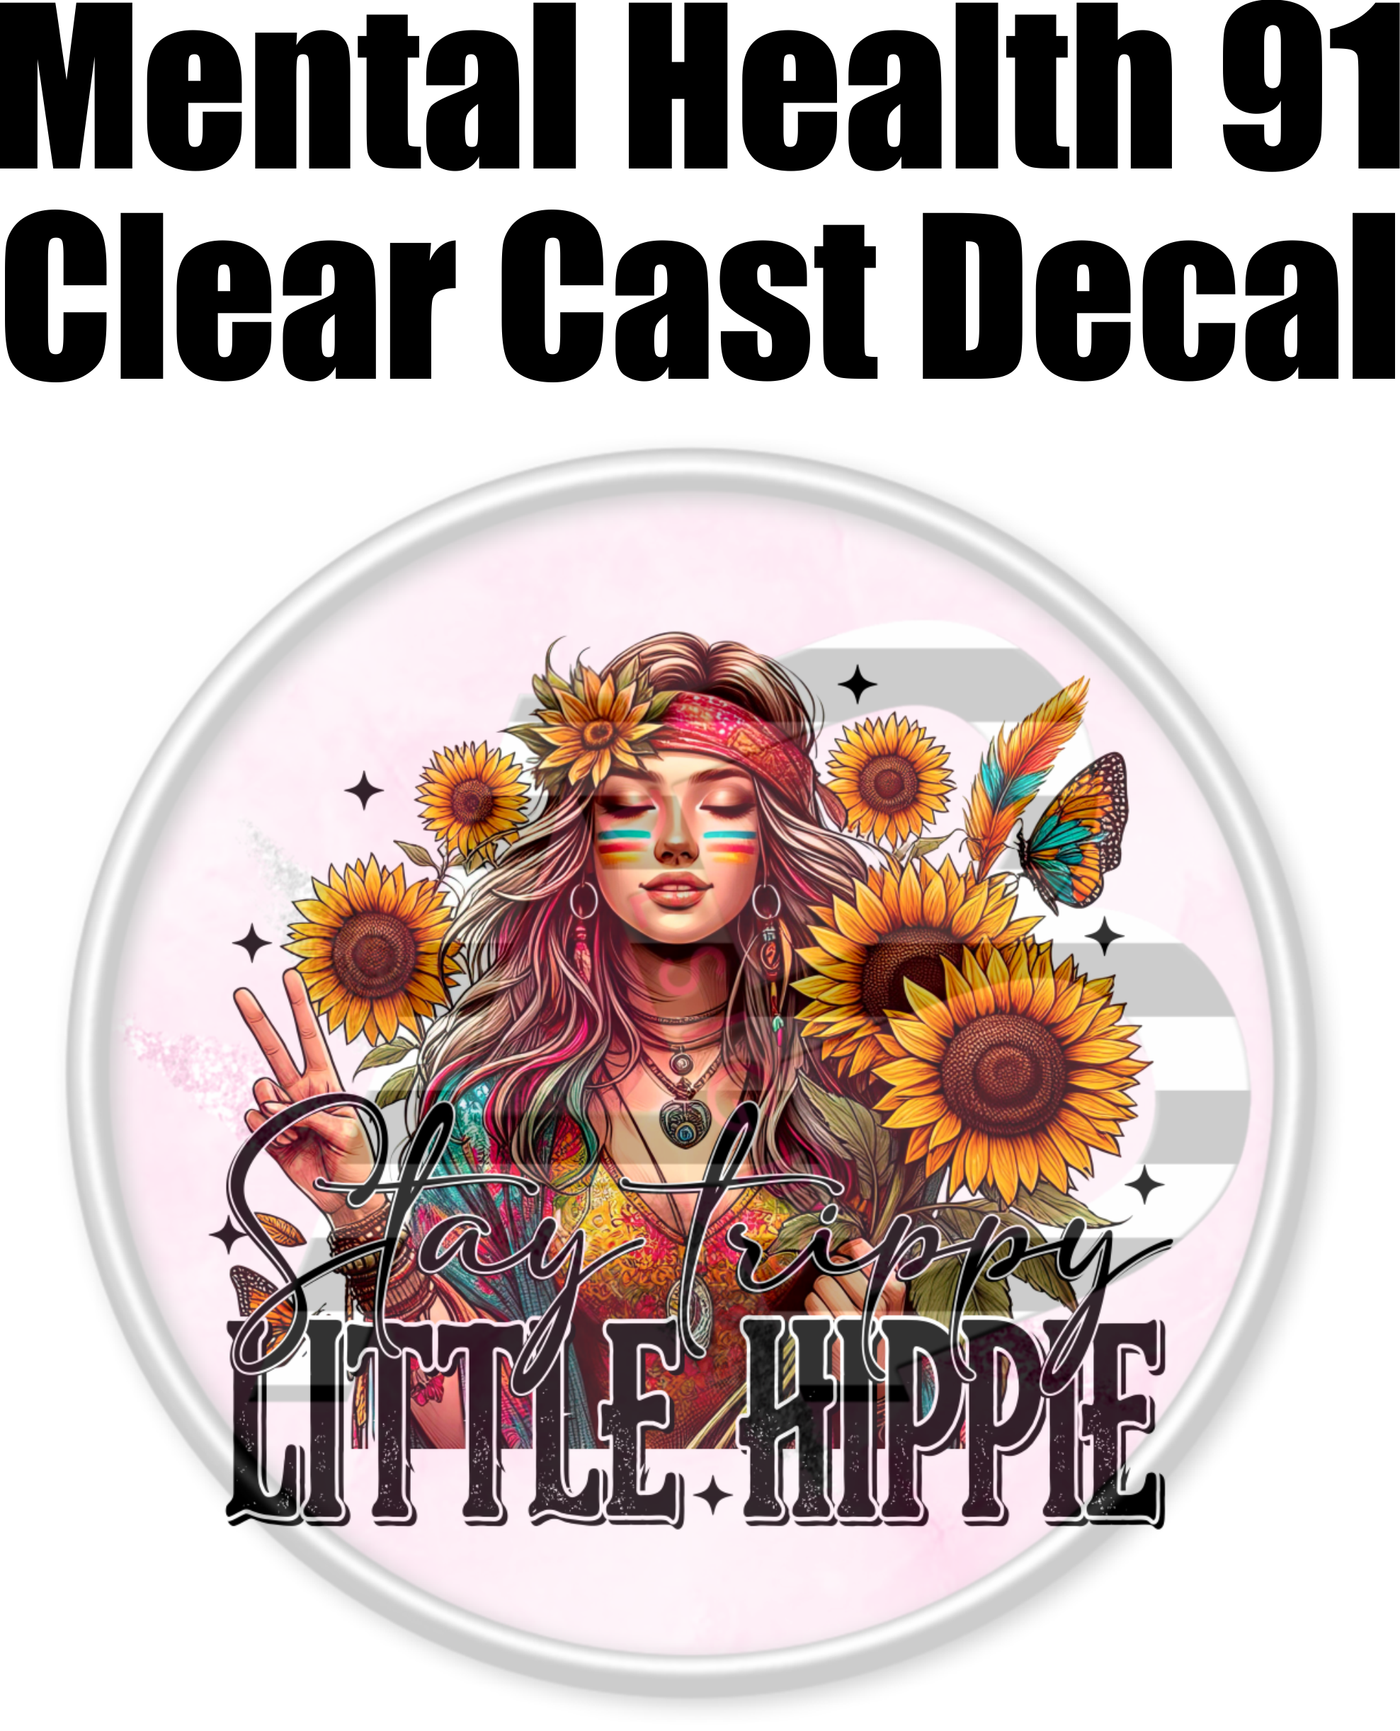 Mental Health 91 - Clear Cast Decal-475